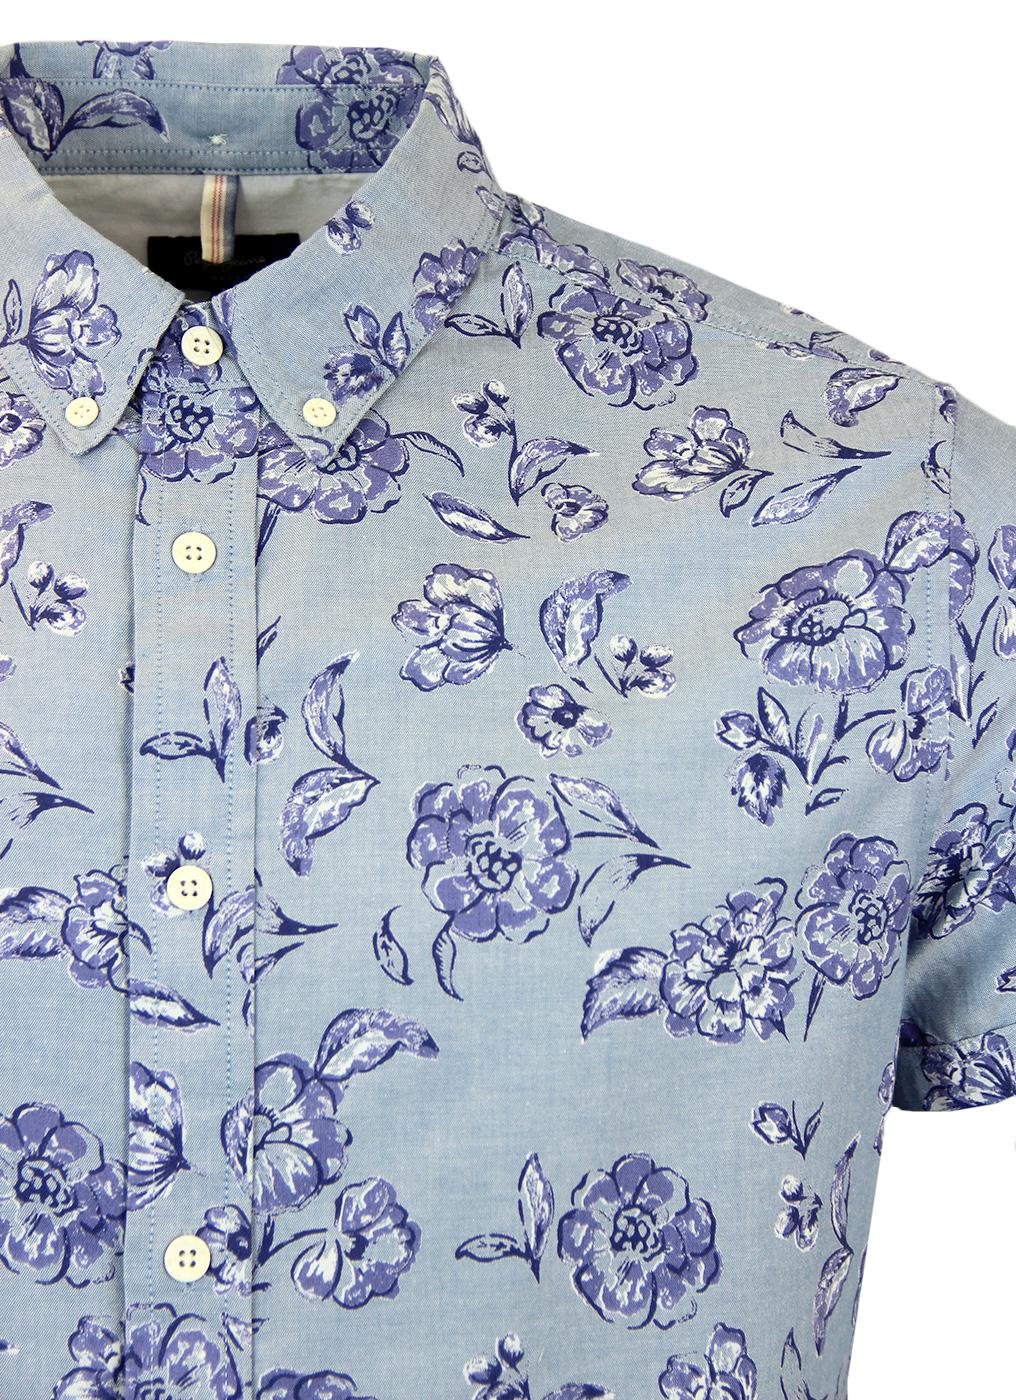 PEPE JEANS Dalmore Retro Floral Button Down Shirt in Chambray